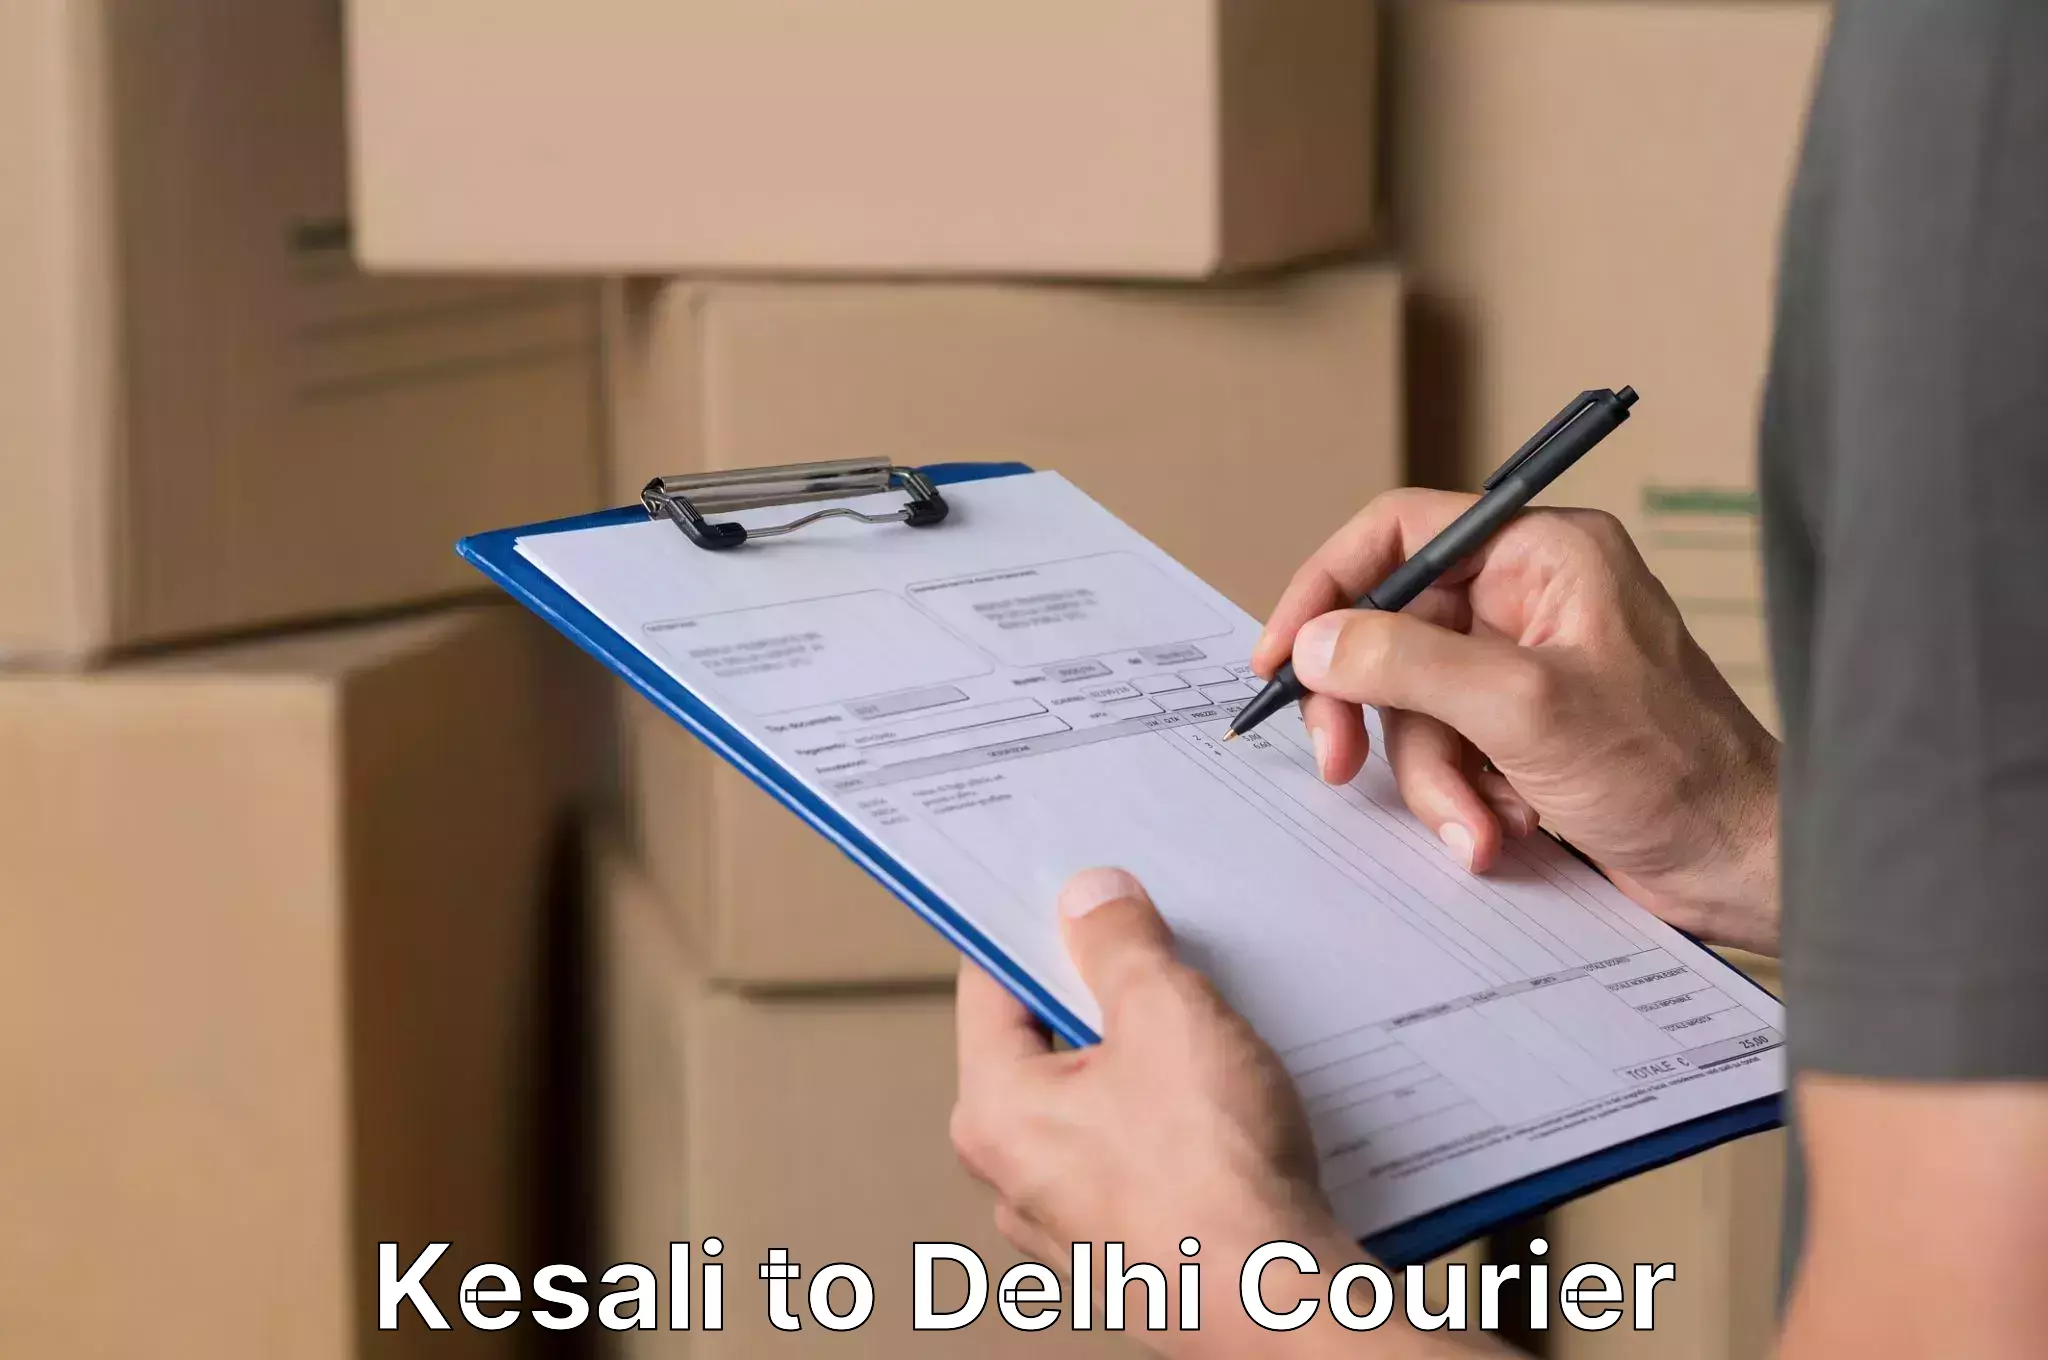 Hassle-free relocation Kesali to East Delhi